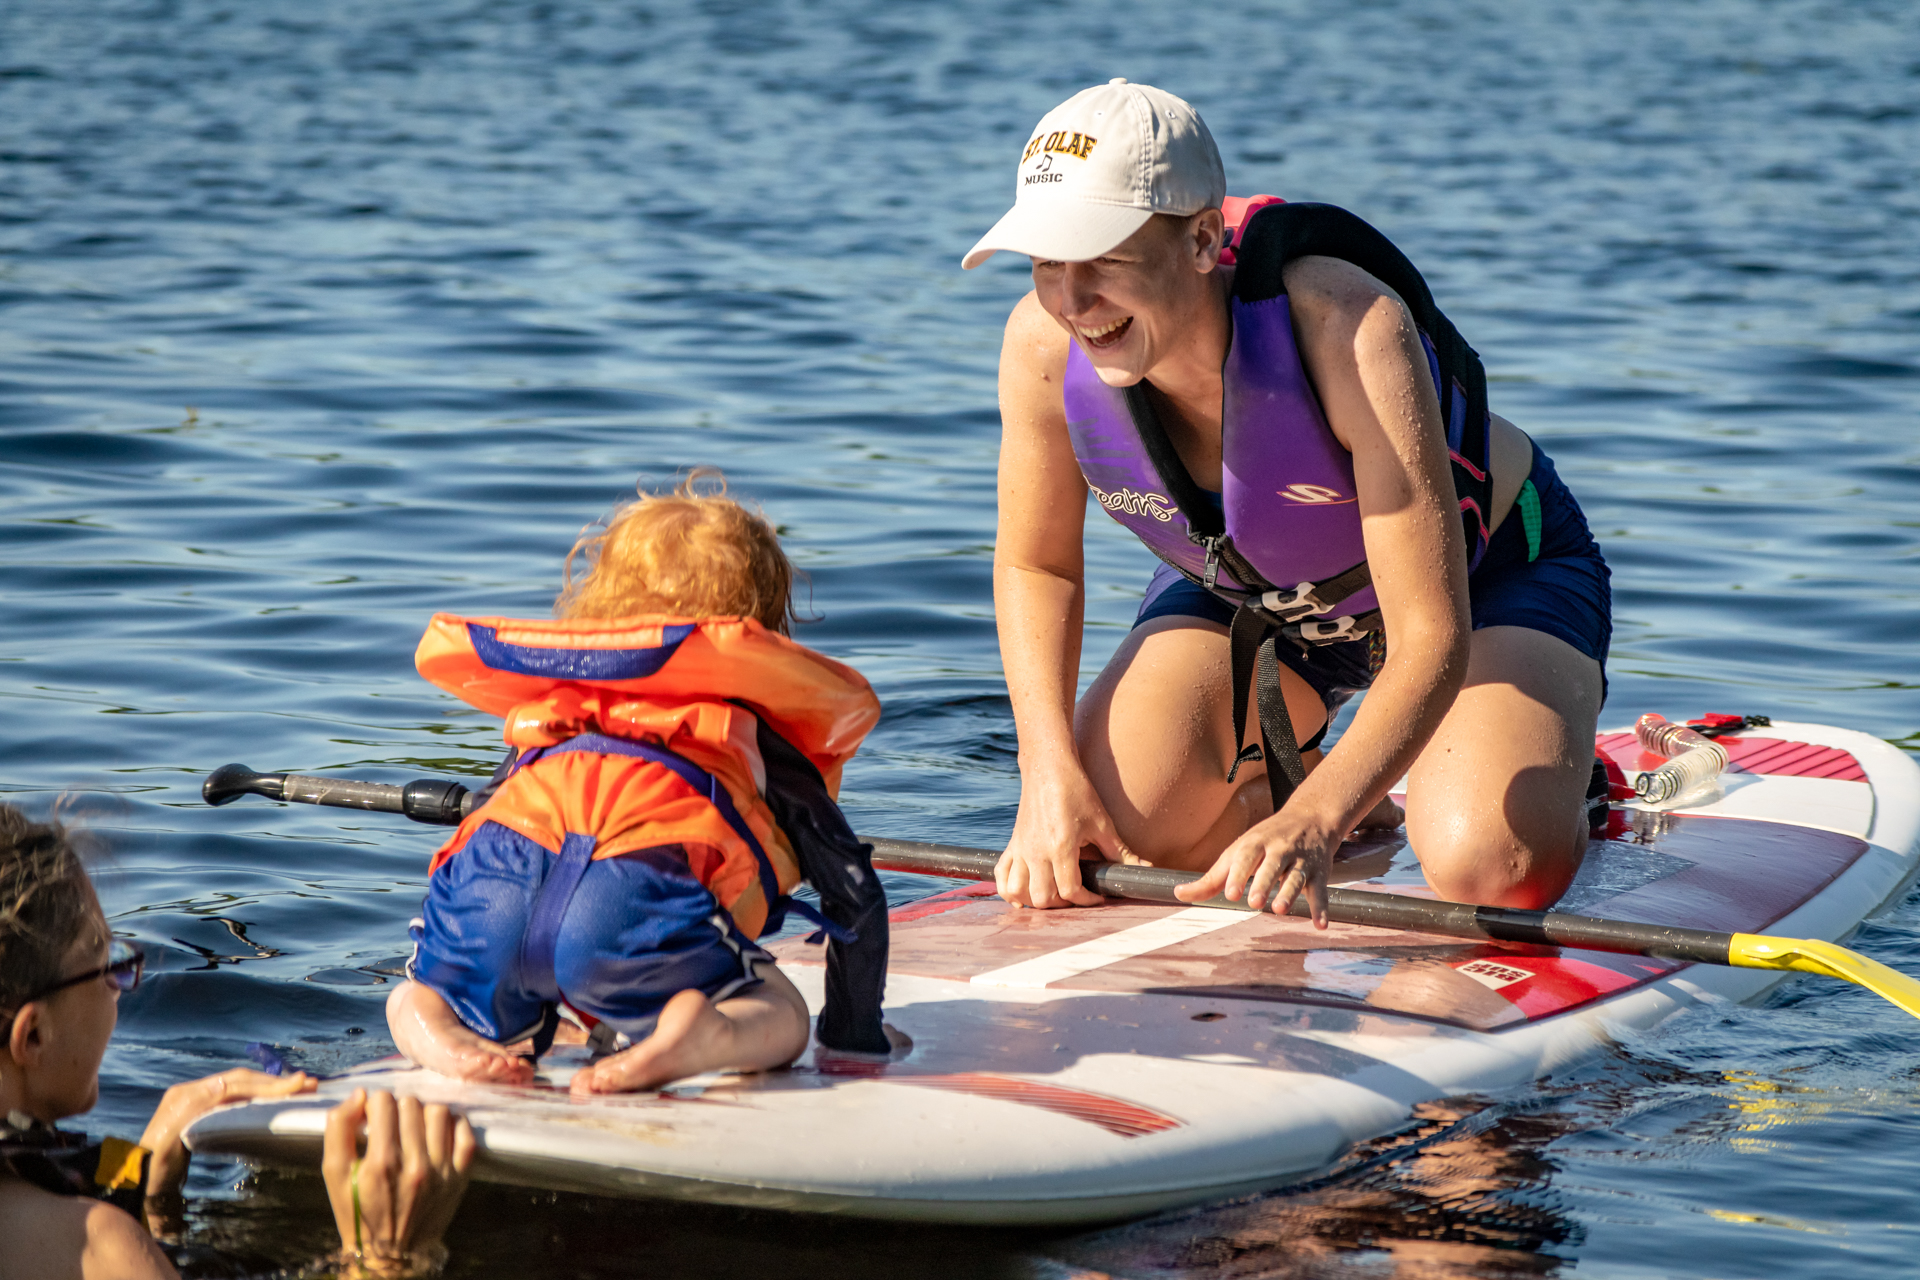 A smiling mom and a toddler, both wearing life jackets, are kneeling on a paddleboard facing each other on calm, blue water